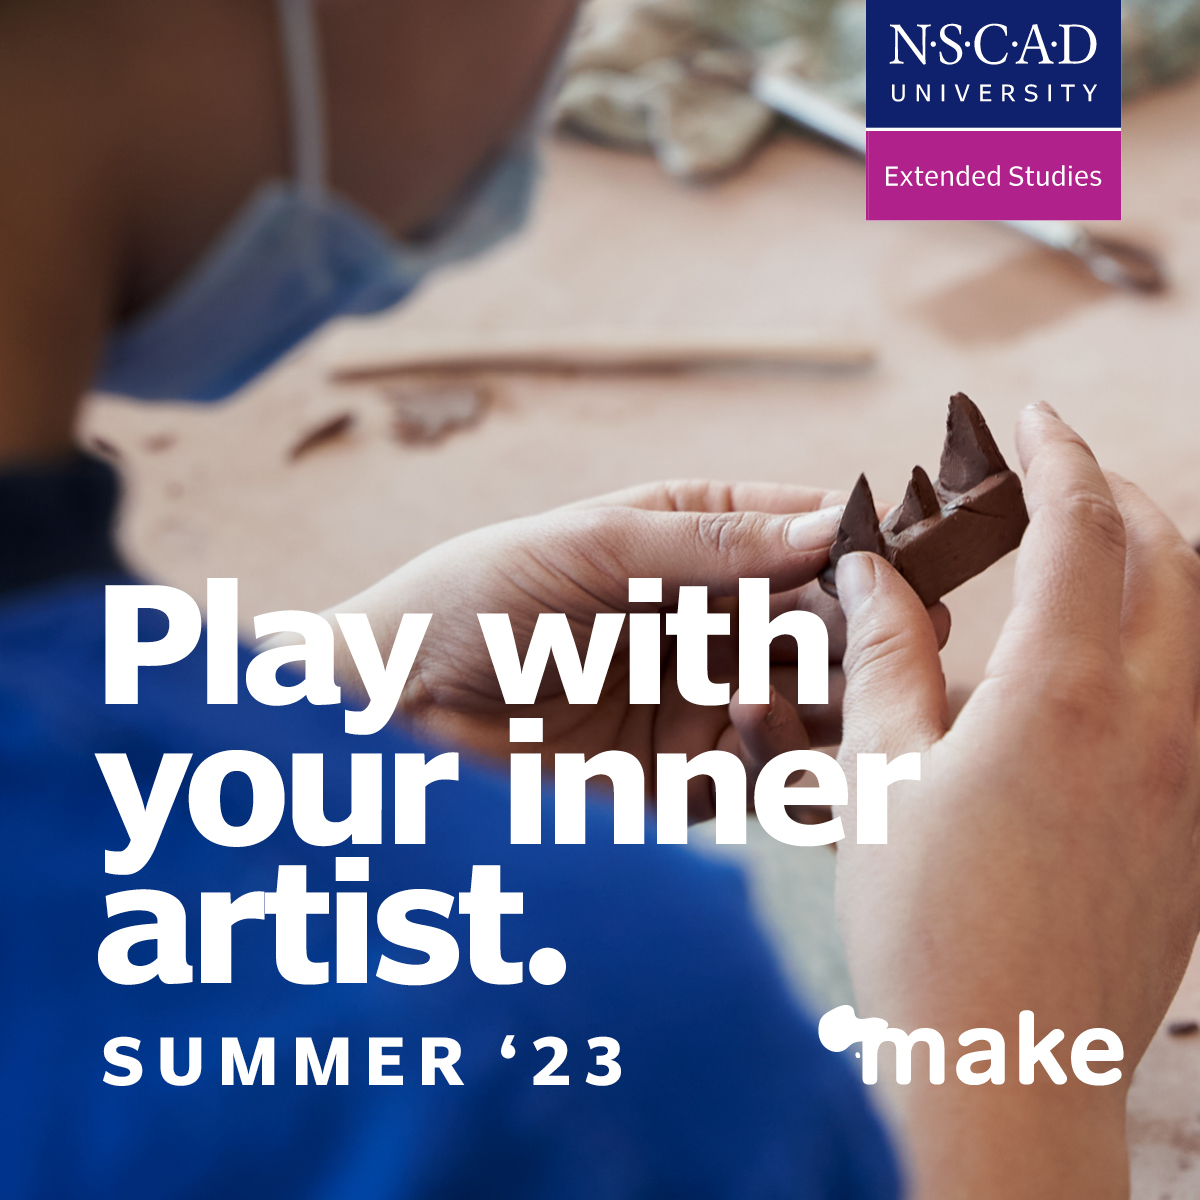 Registration for NSCAD Extended Studies' spring and summer courses is now open! From kids camps to fine arts courses, there is something for every level of artist.

Explore more at make.nscad.ca

#iamnscad #NSCADExtendedStudies